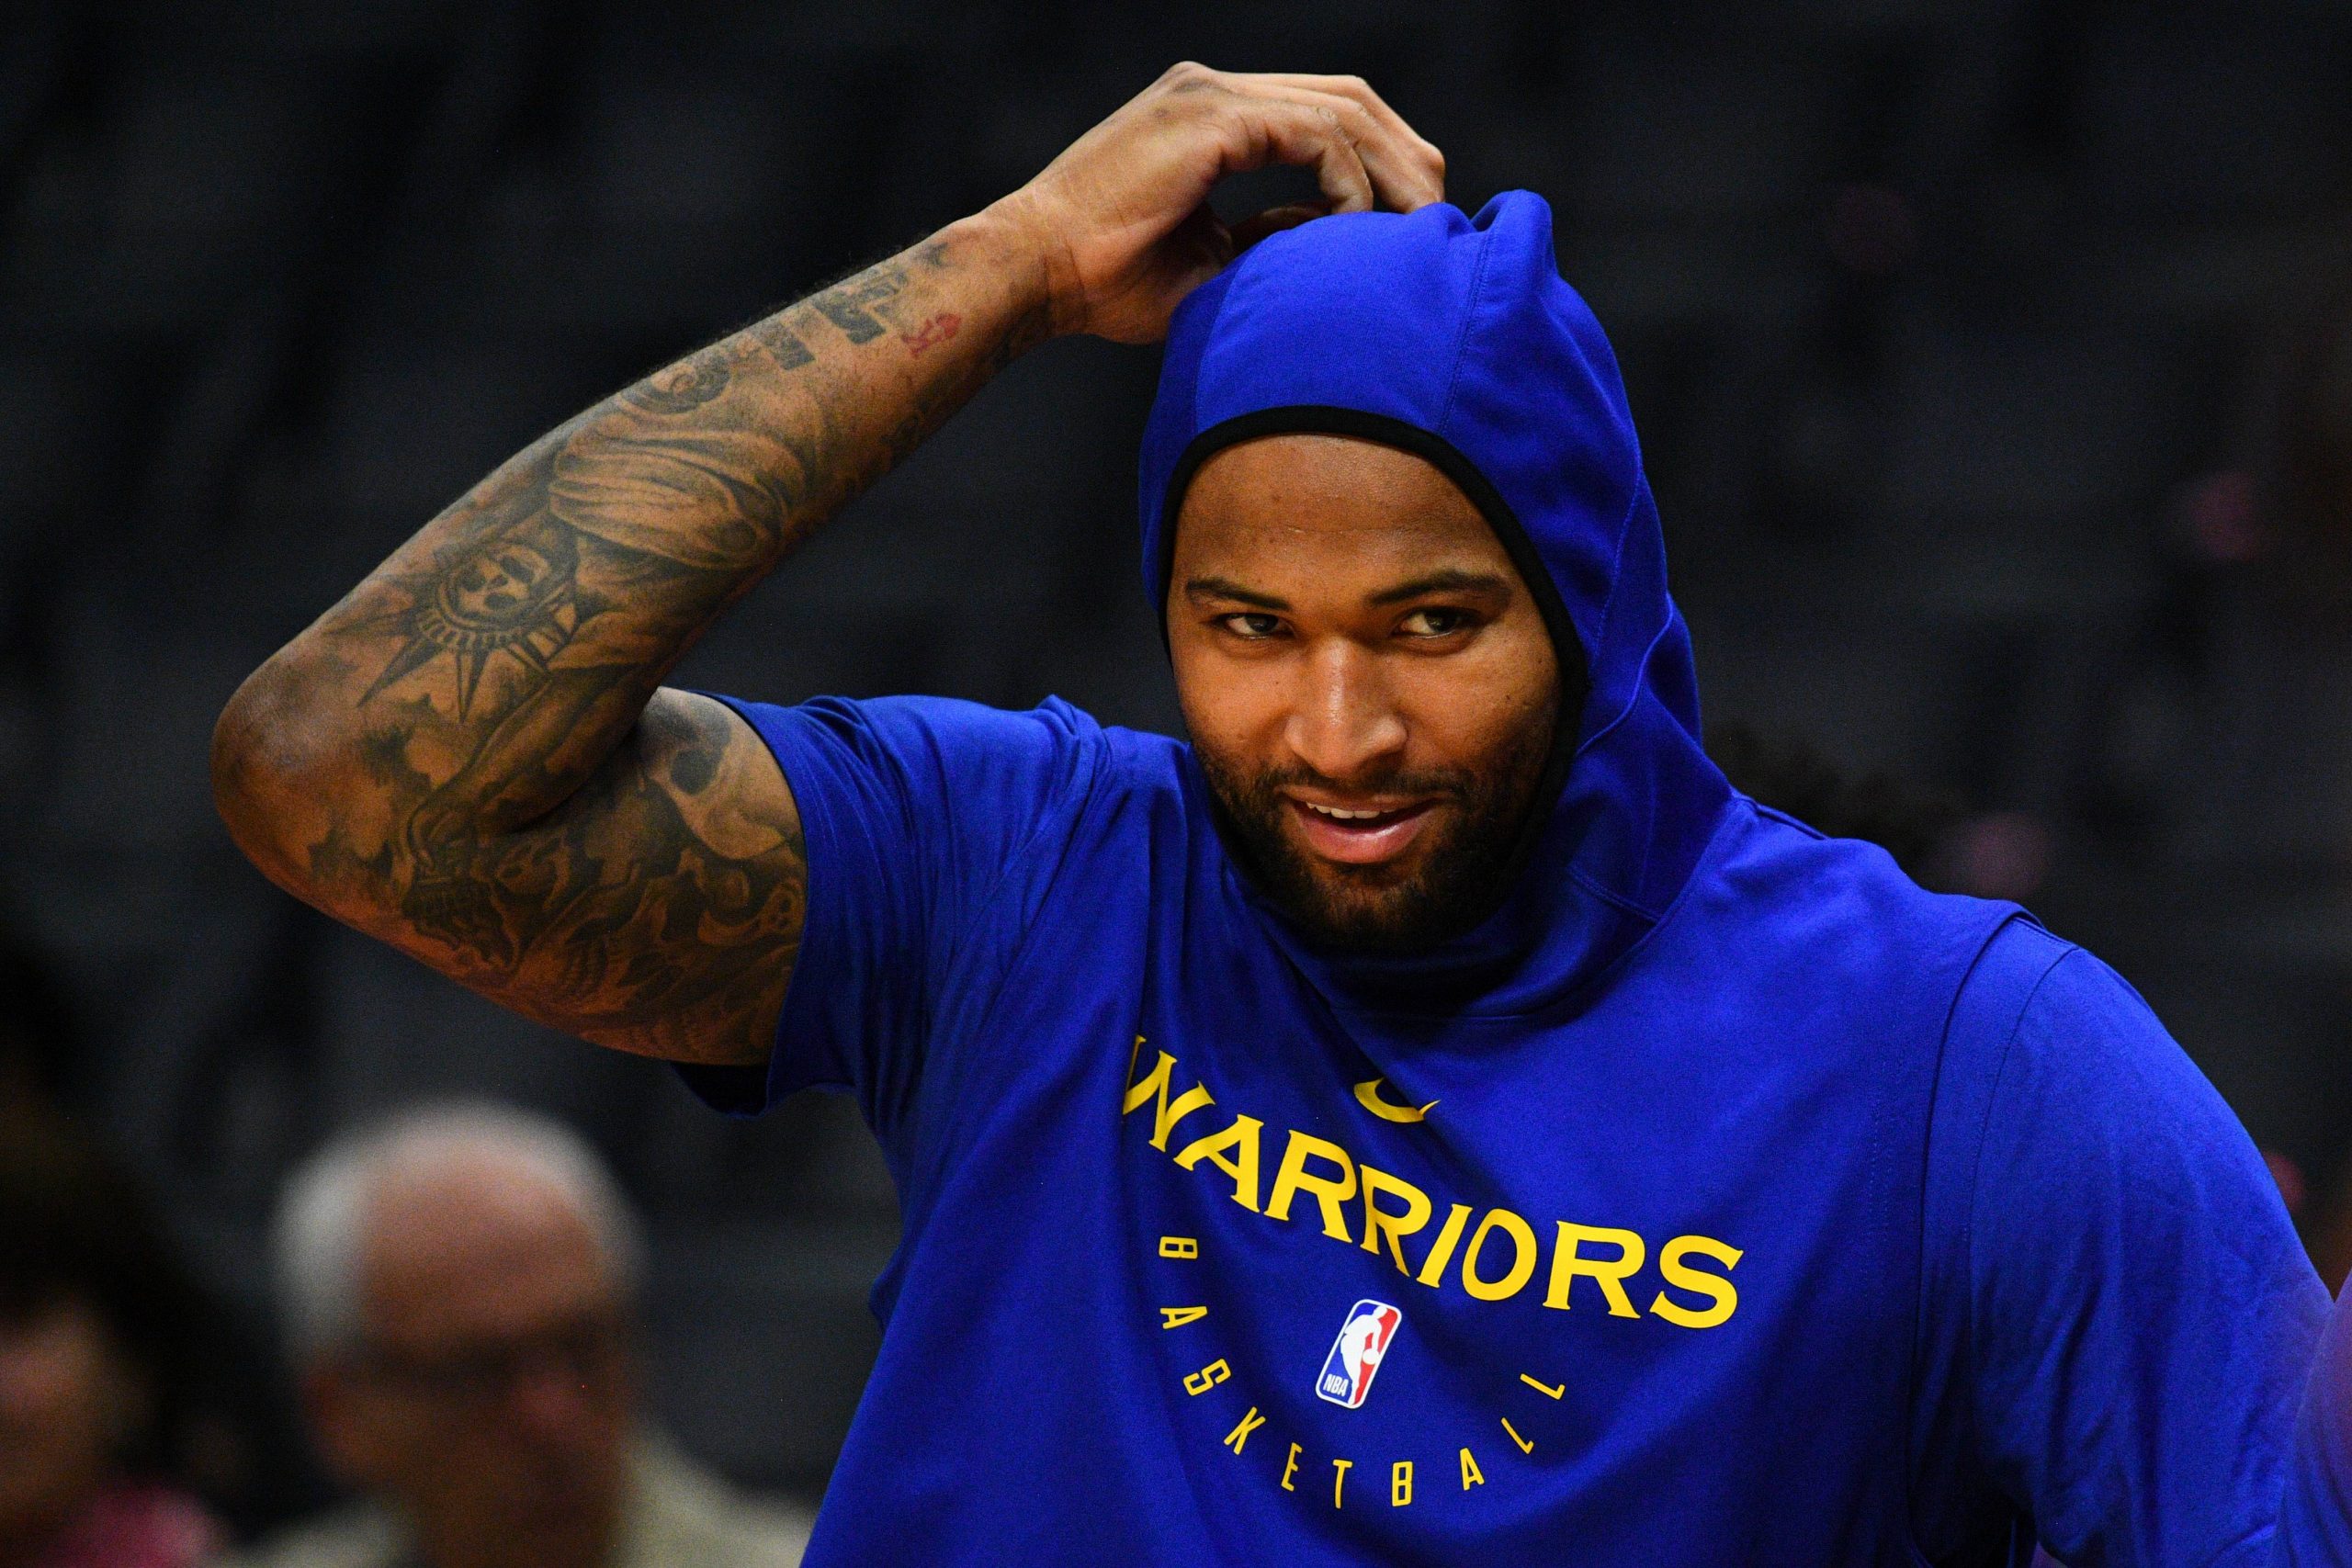 DeMarcus Cousins 2021 - Net Worth, Salary, Records, and Endorsements